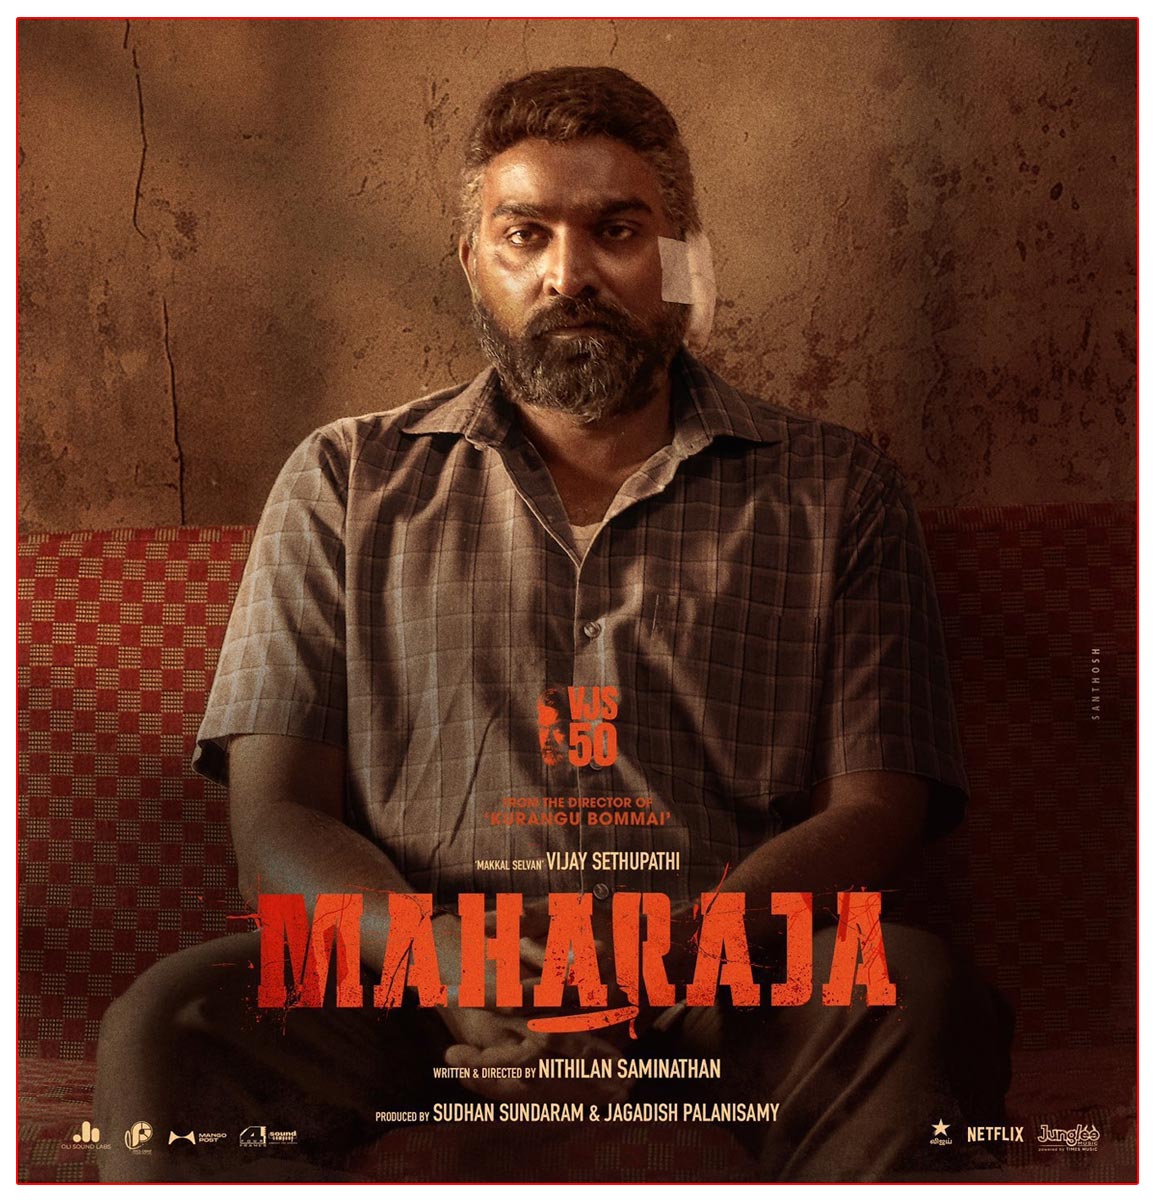 Maharaja is slated for OTT release on July 19